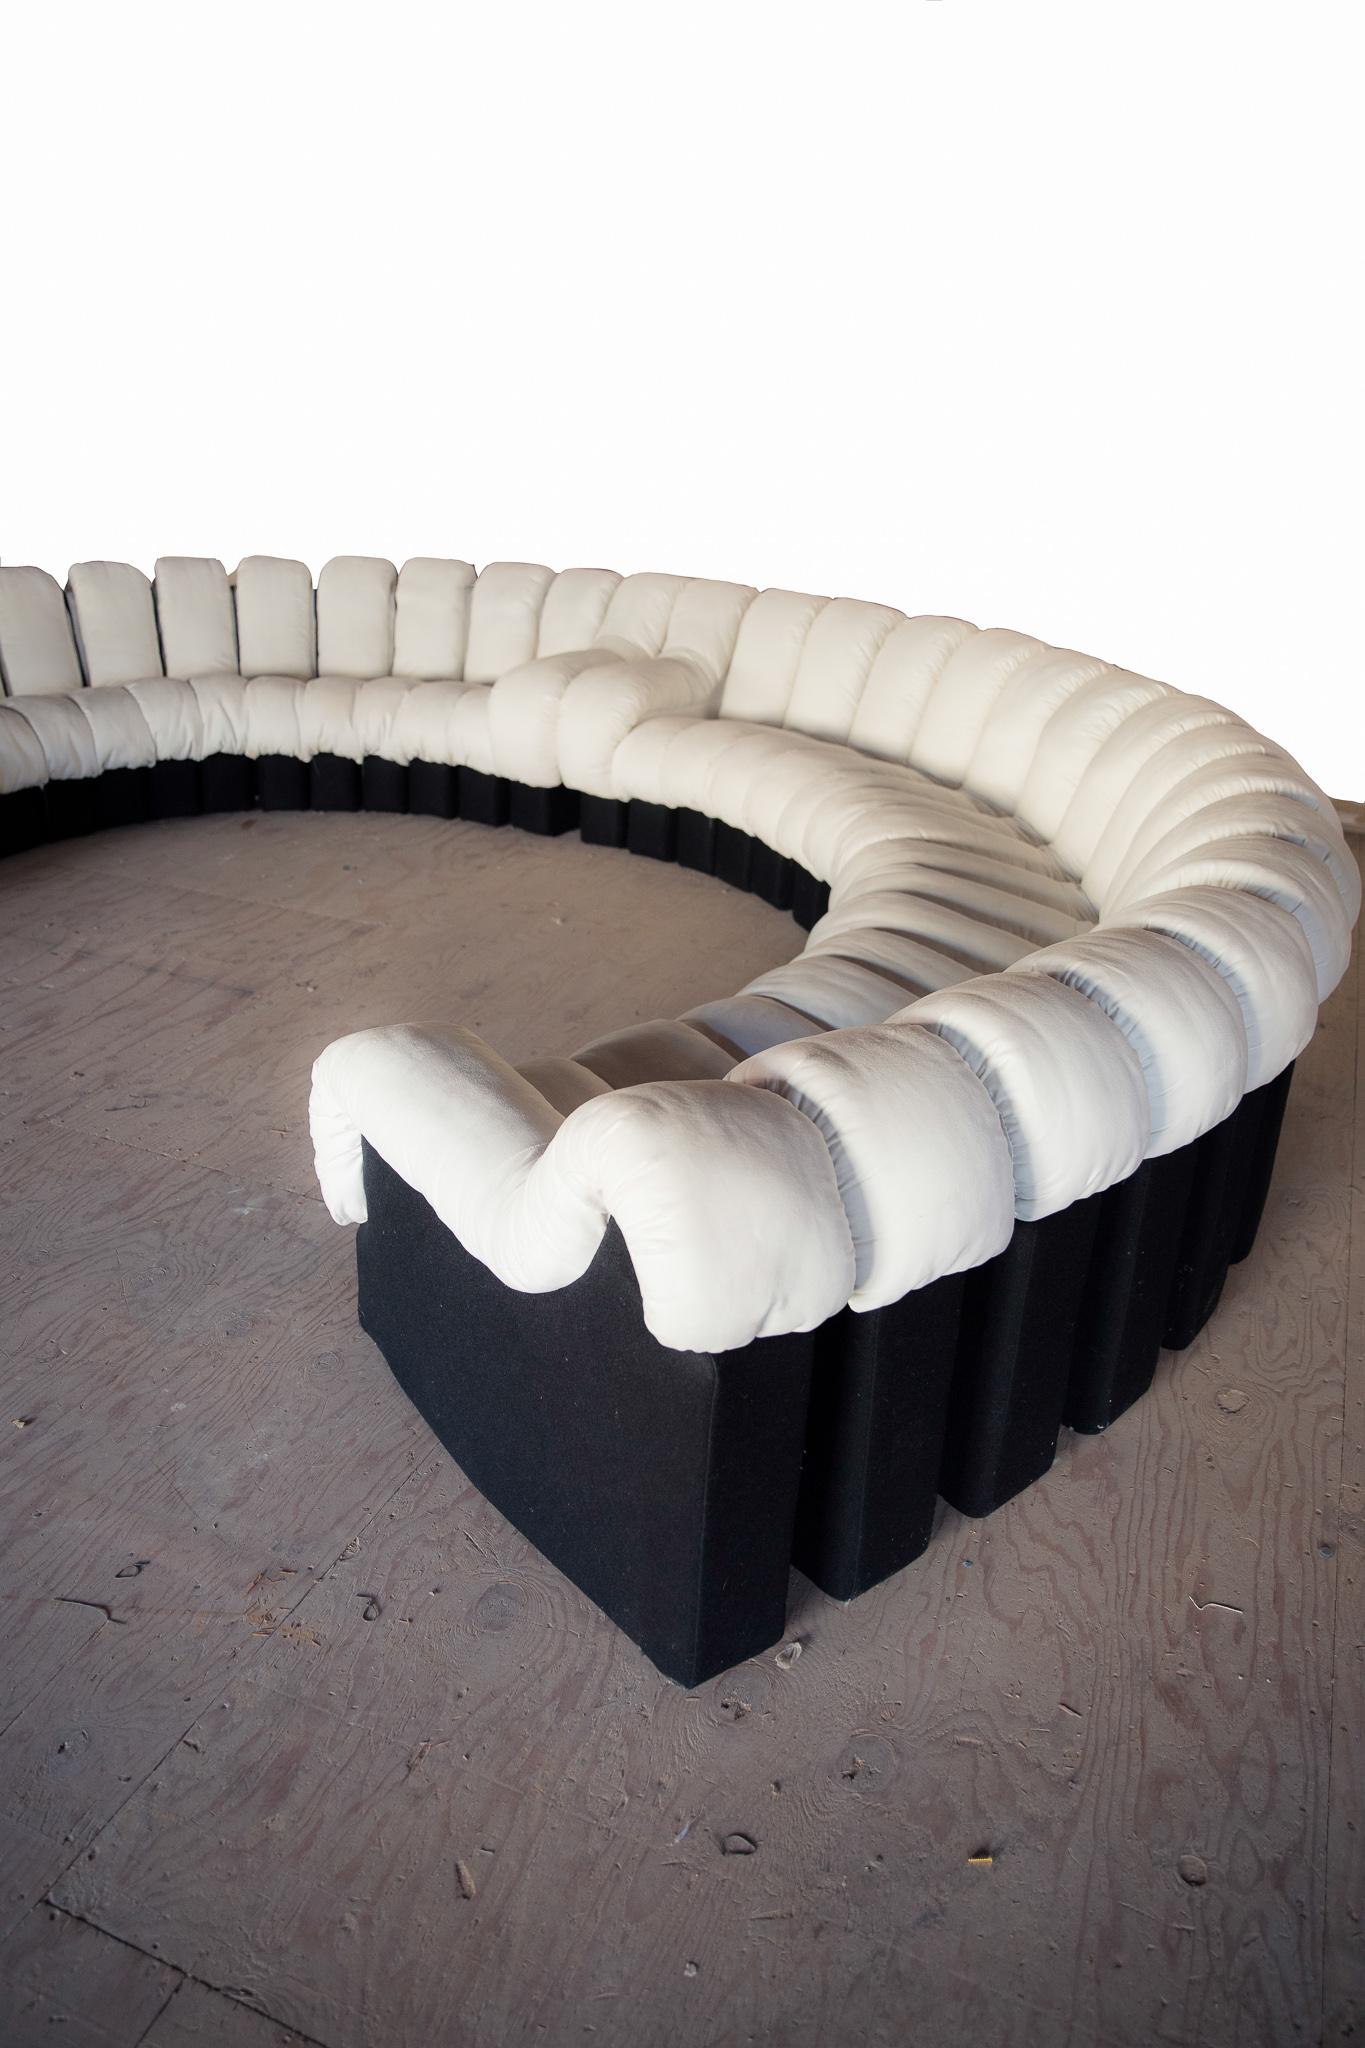 Hand-Crafted De Sede NON STOP Sofa, Rare Matched Pair or One Monumental 34 Element System